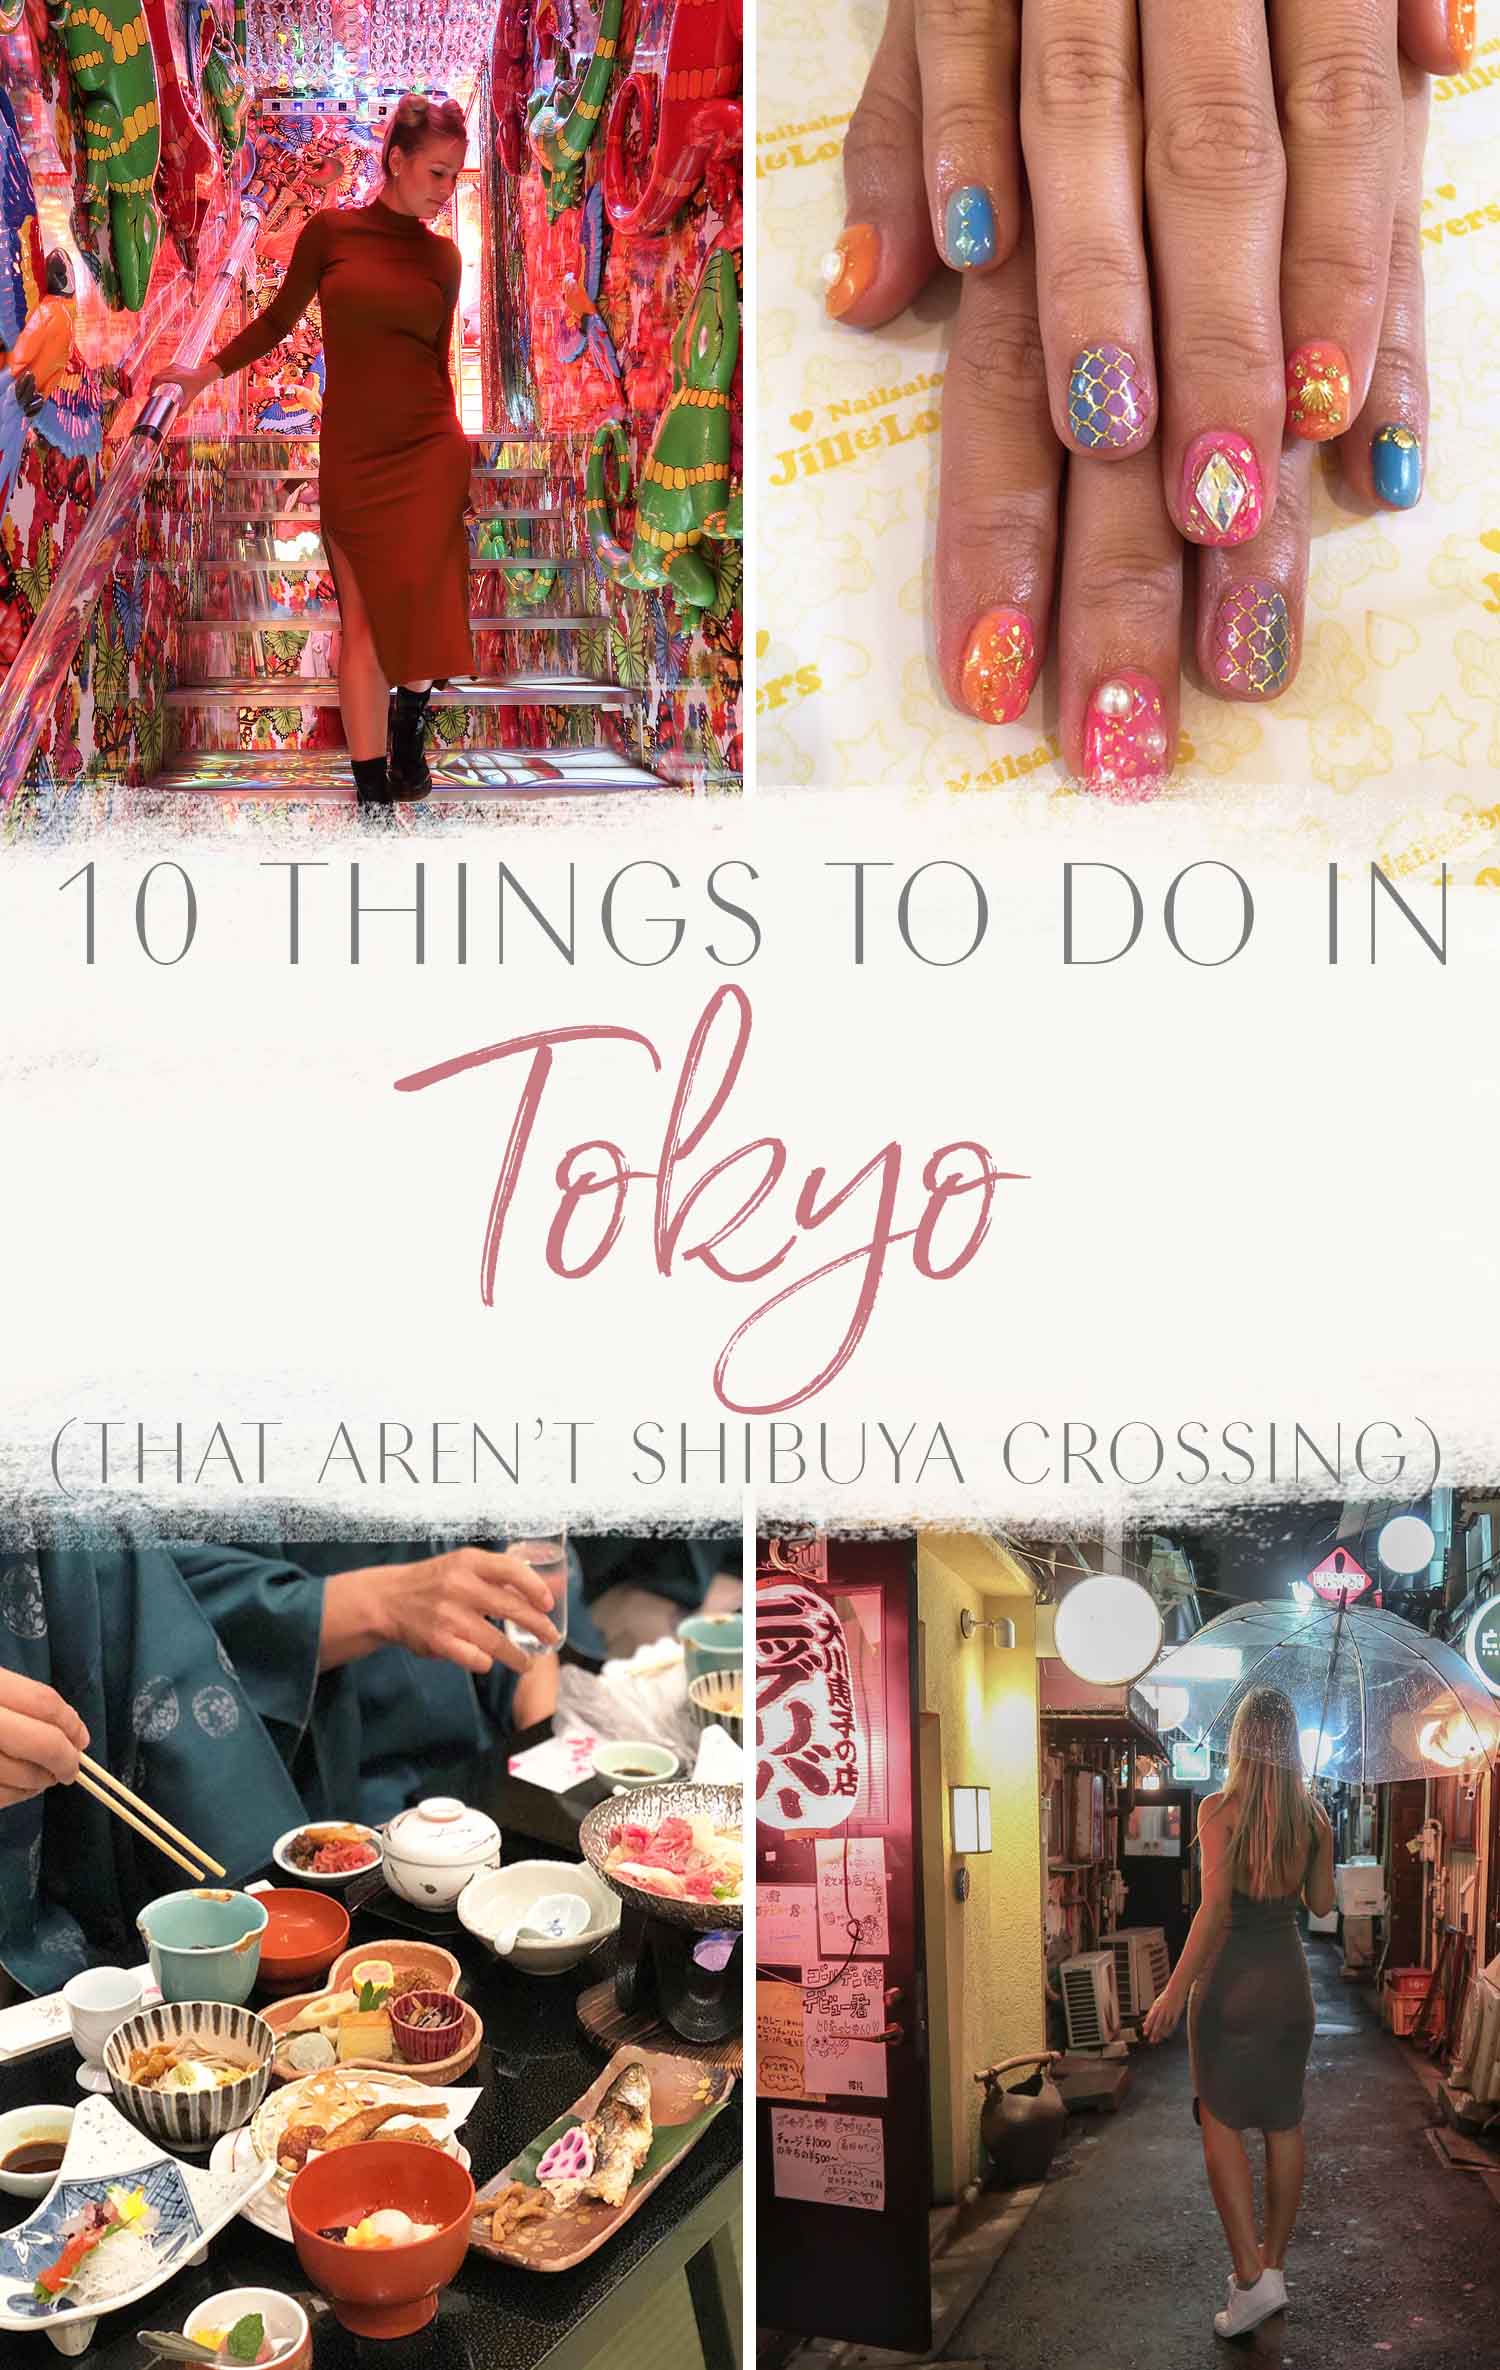 10 things to do in tokyo